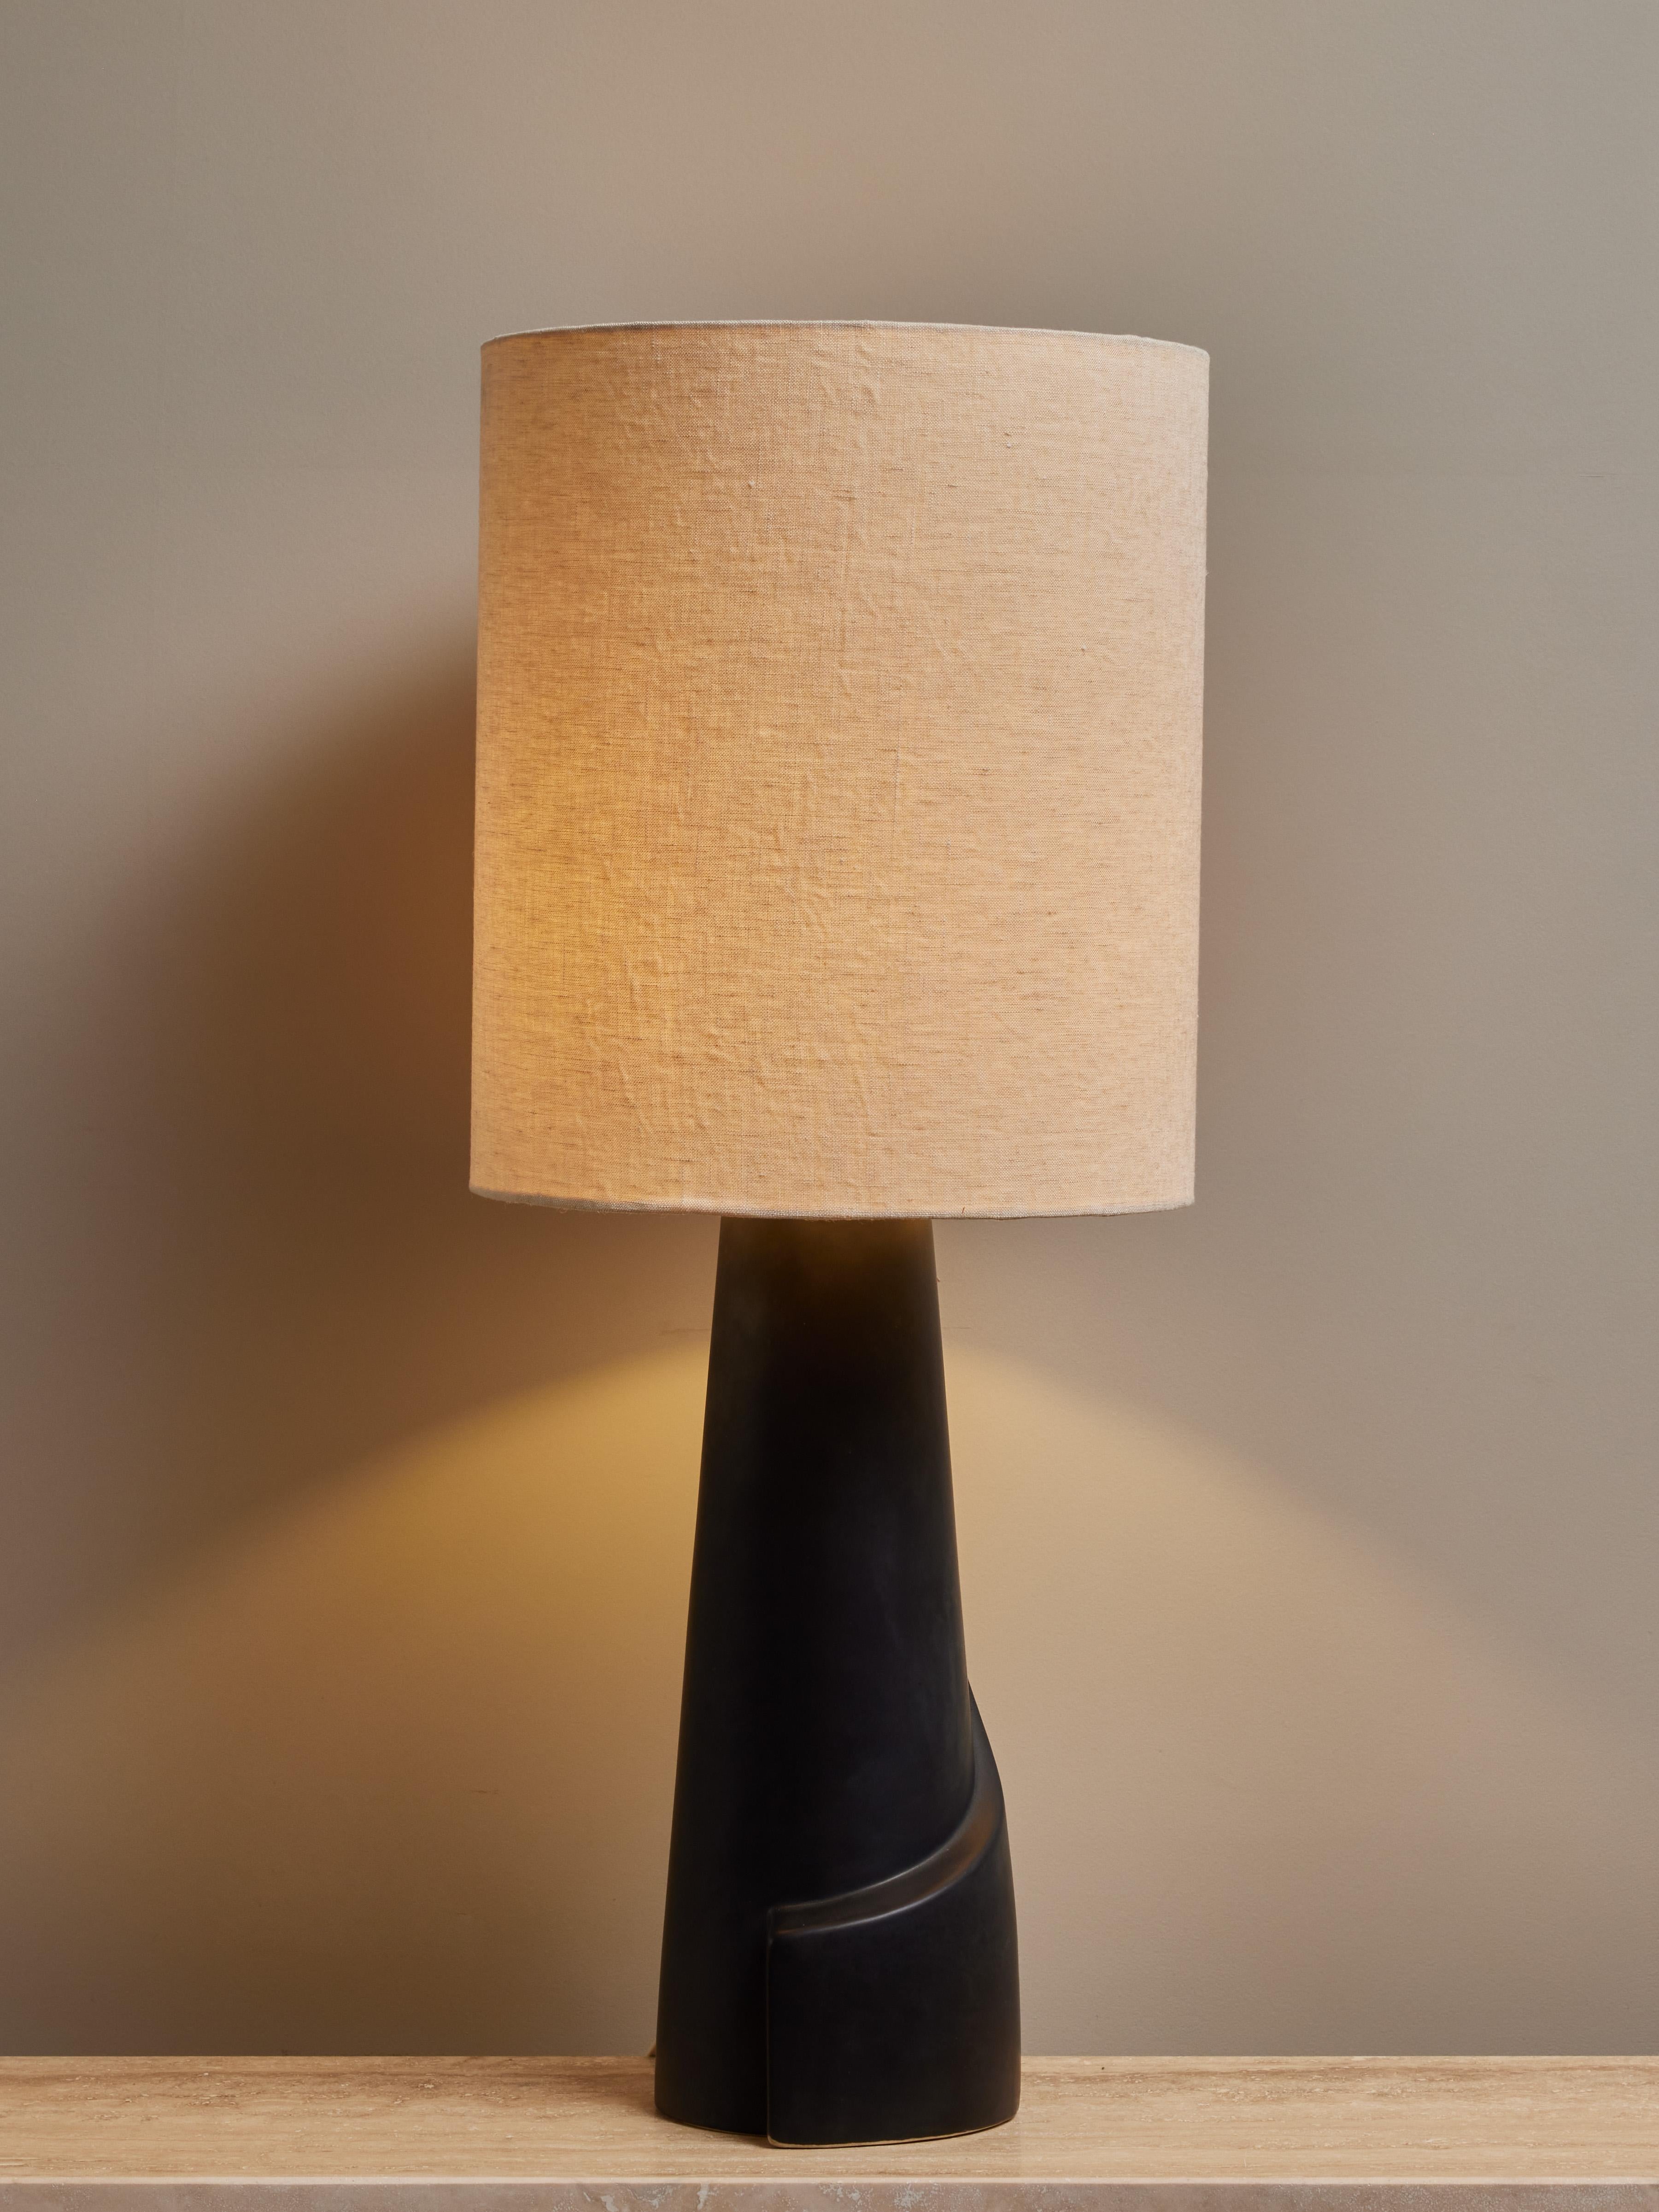 Mid century table lamp made of painted ceramic, with a twisted motif circling the base.